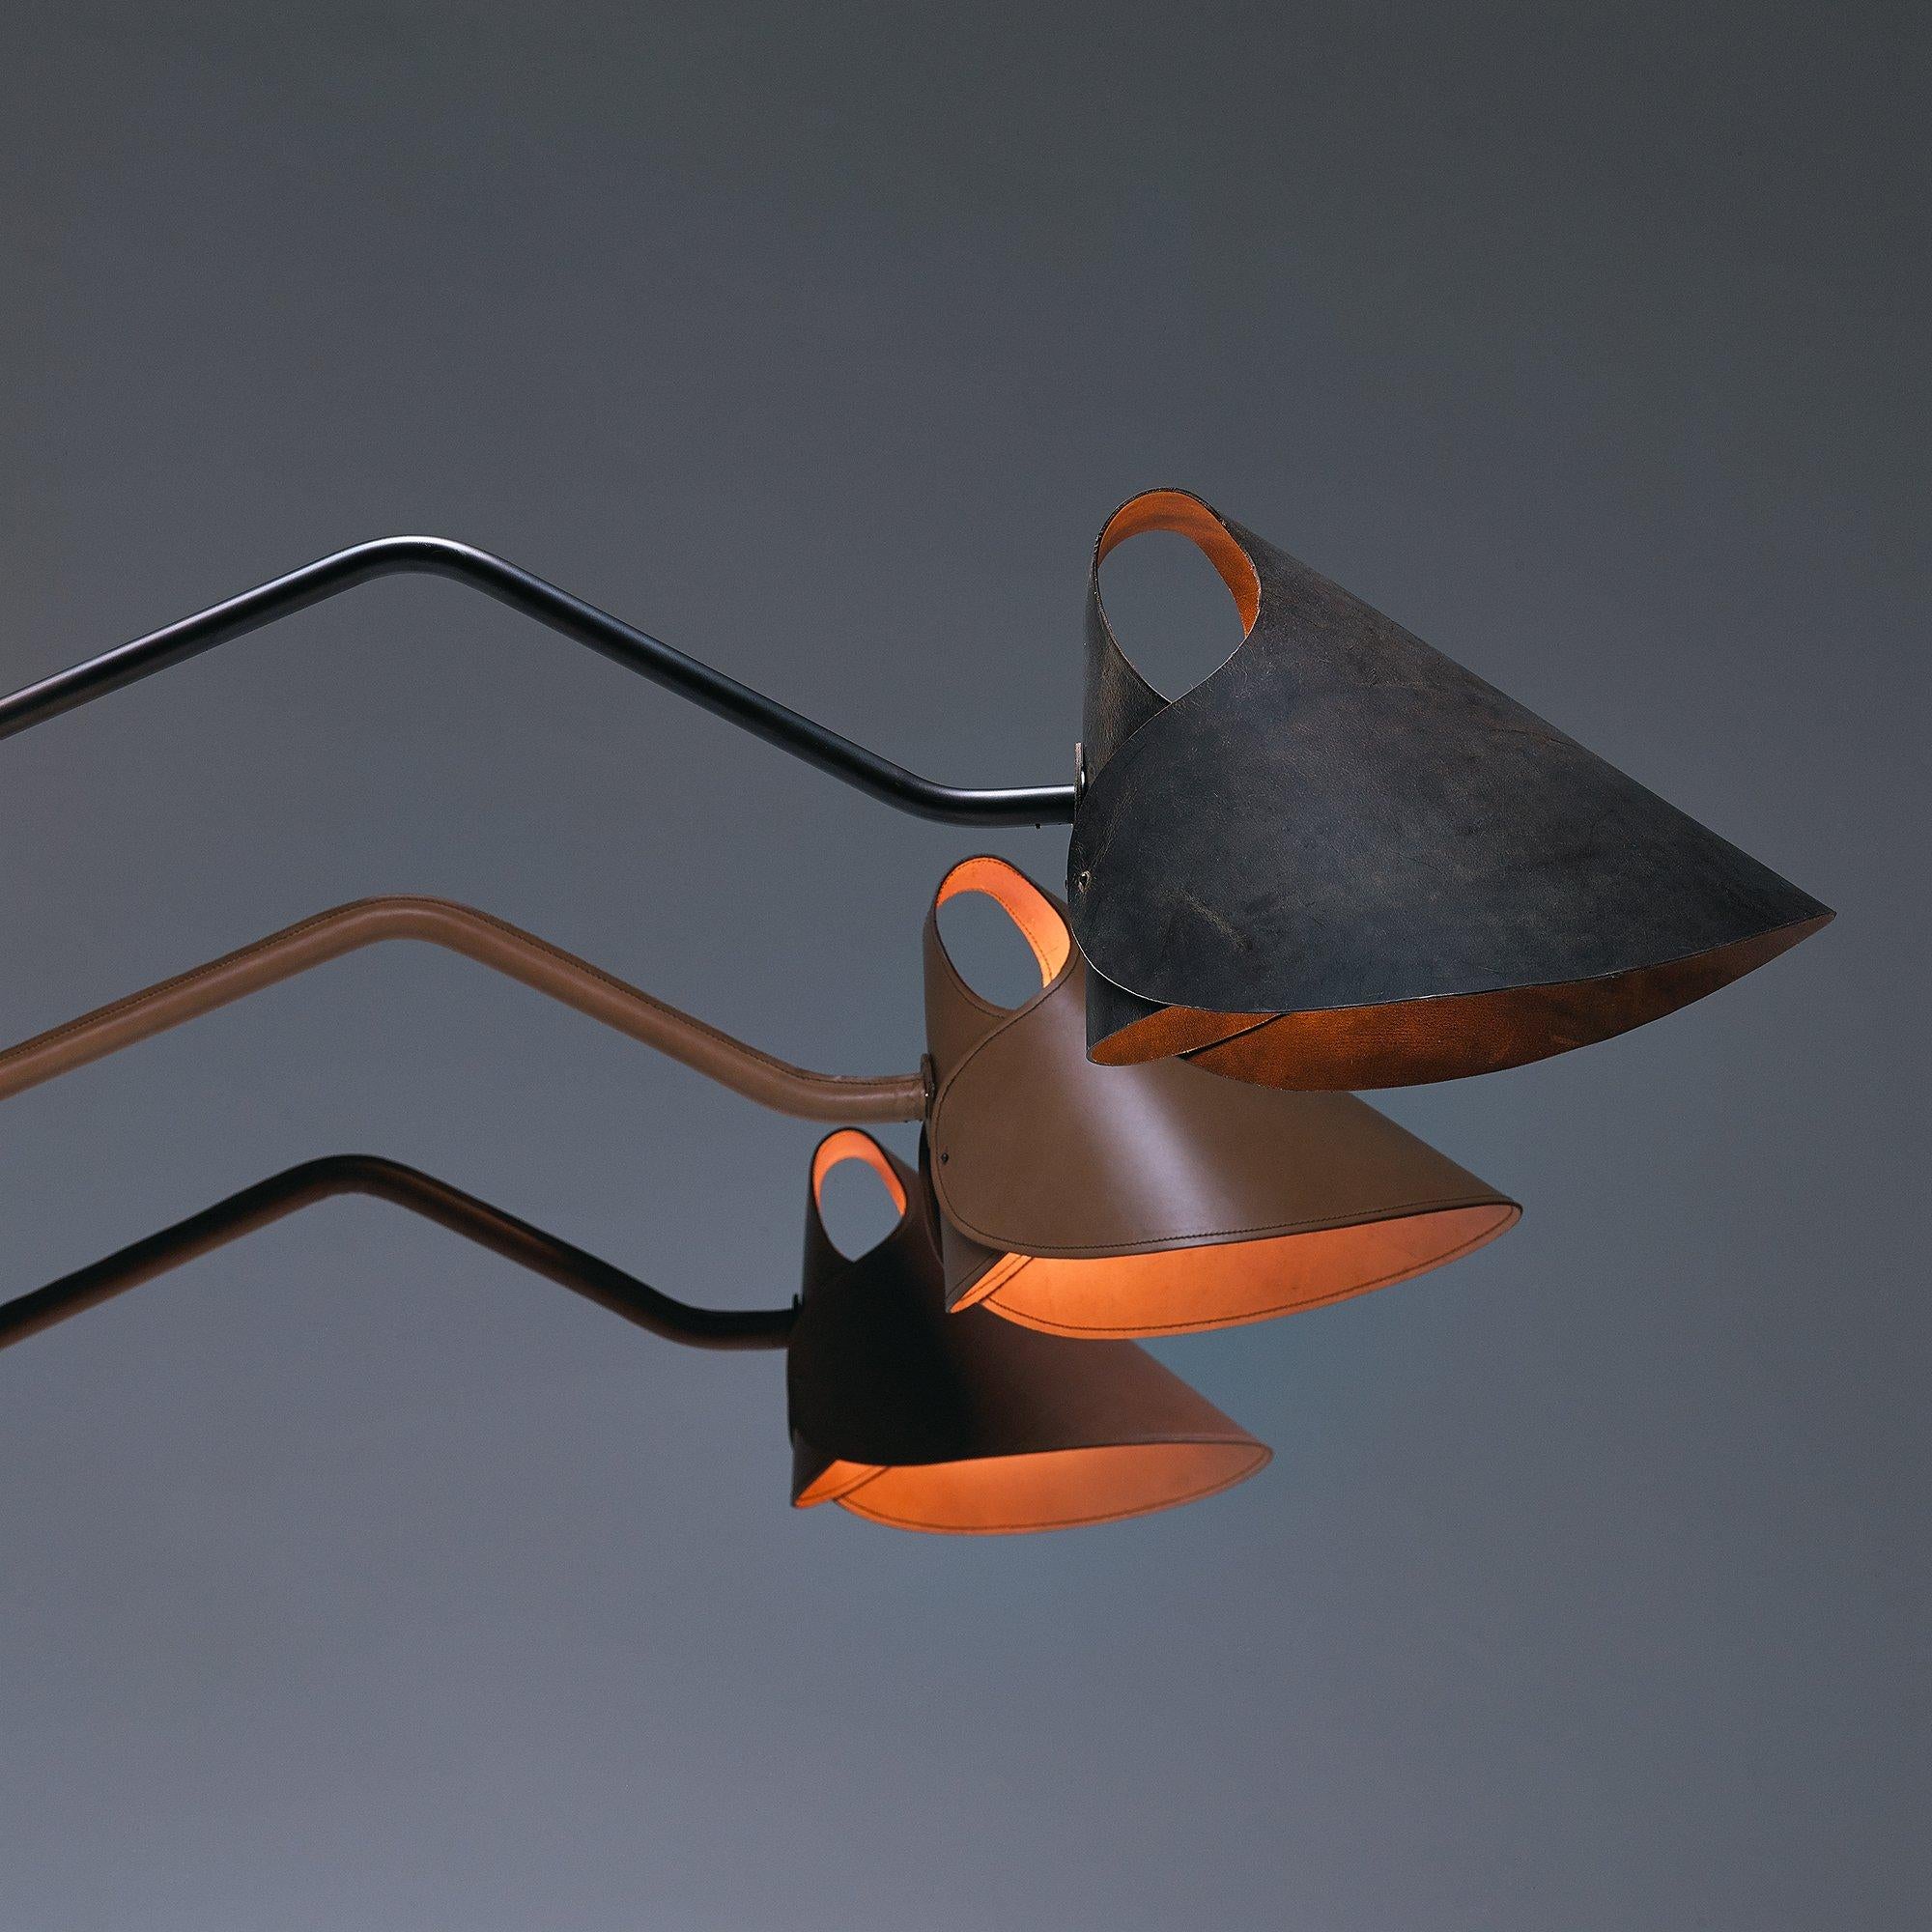 Is there any question why the Mrs. Q wall fixture has curled its way into the hearts of design savants the world over? This kicky creation, designed by Jacco Maris, has a fabulous folded leather shade, available in five colors, perched upon a